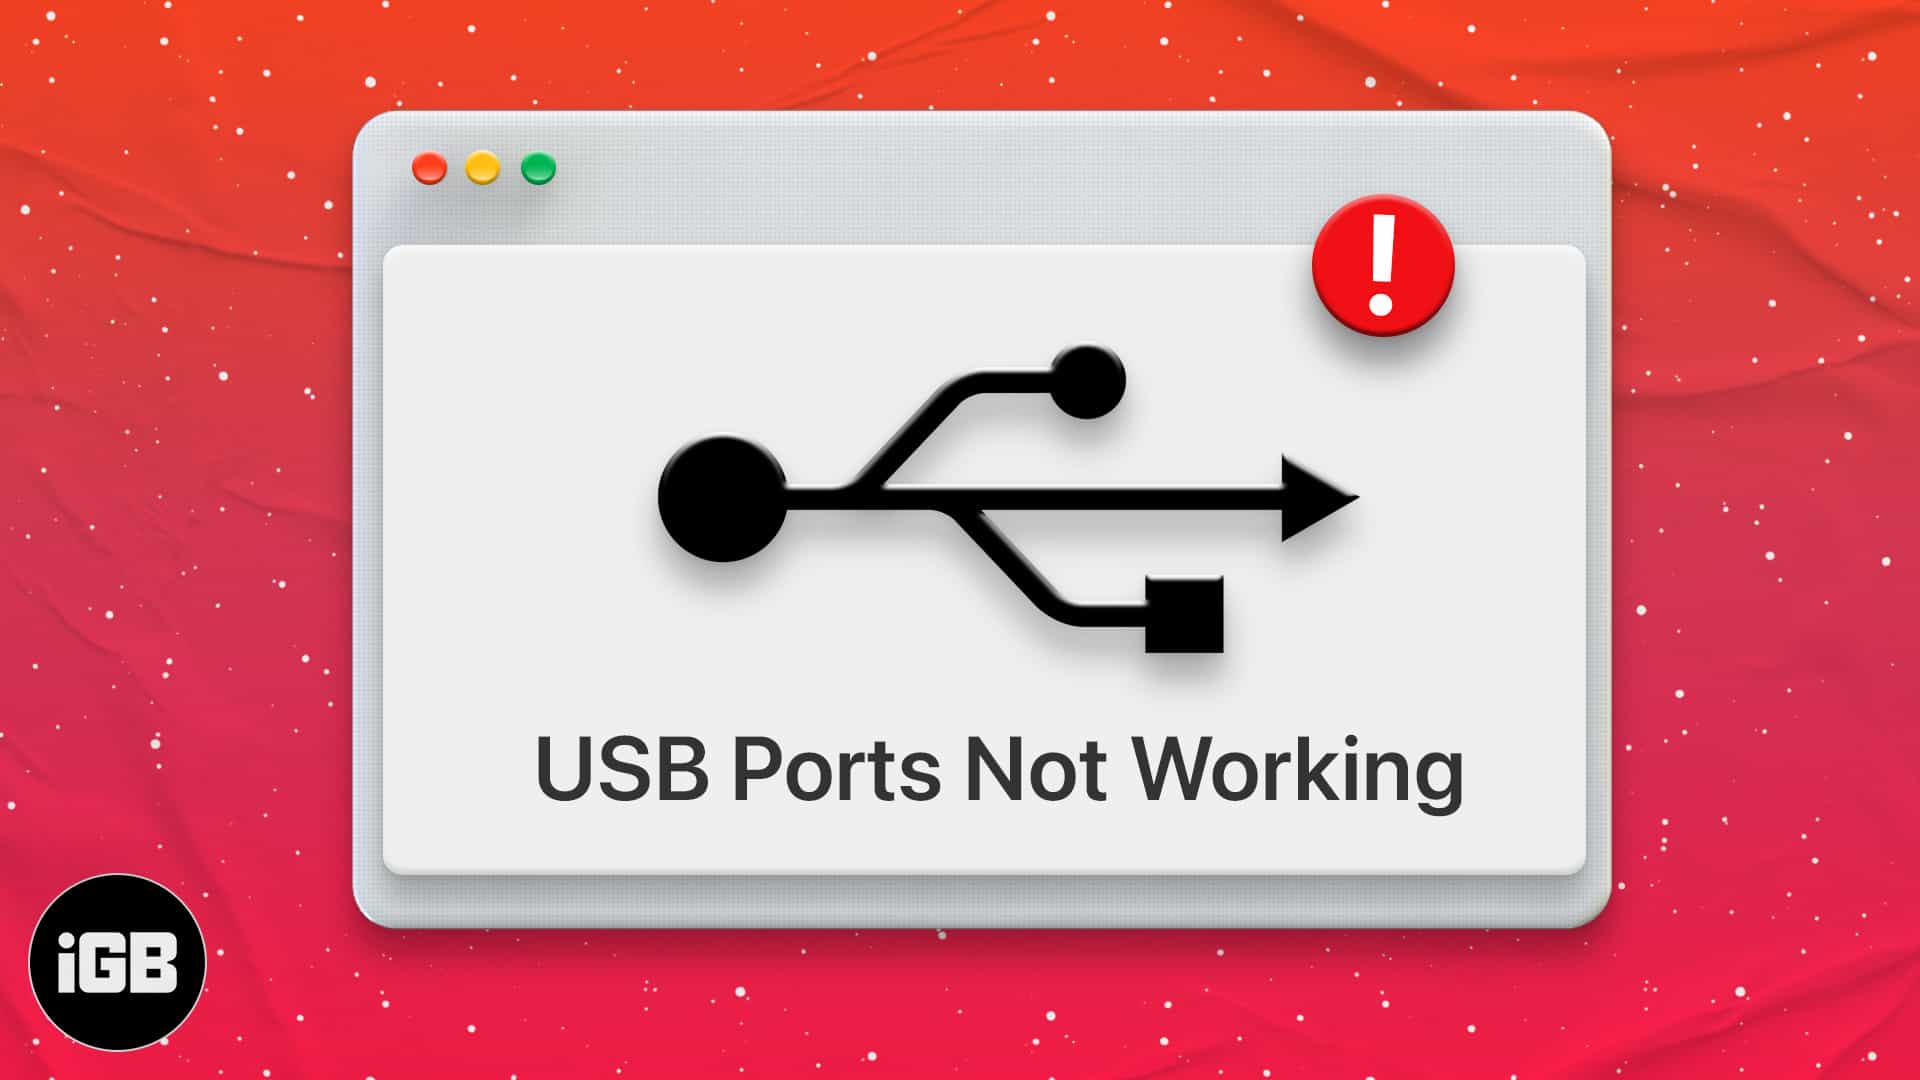 USB ports not working Mac? Here is how to fix it